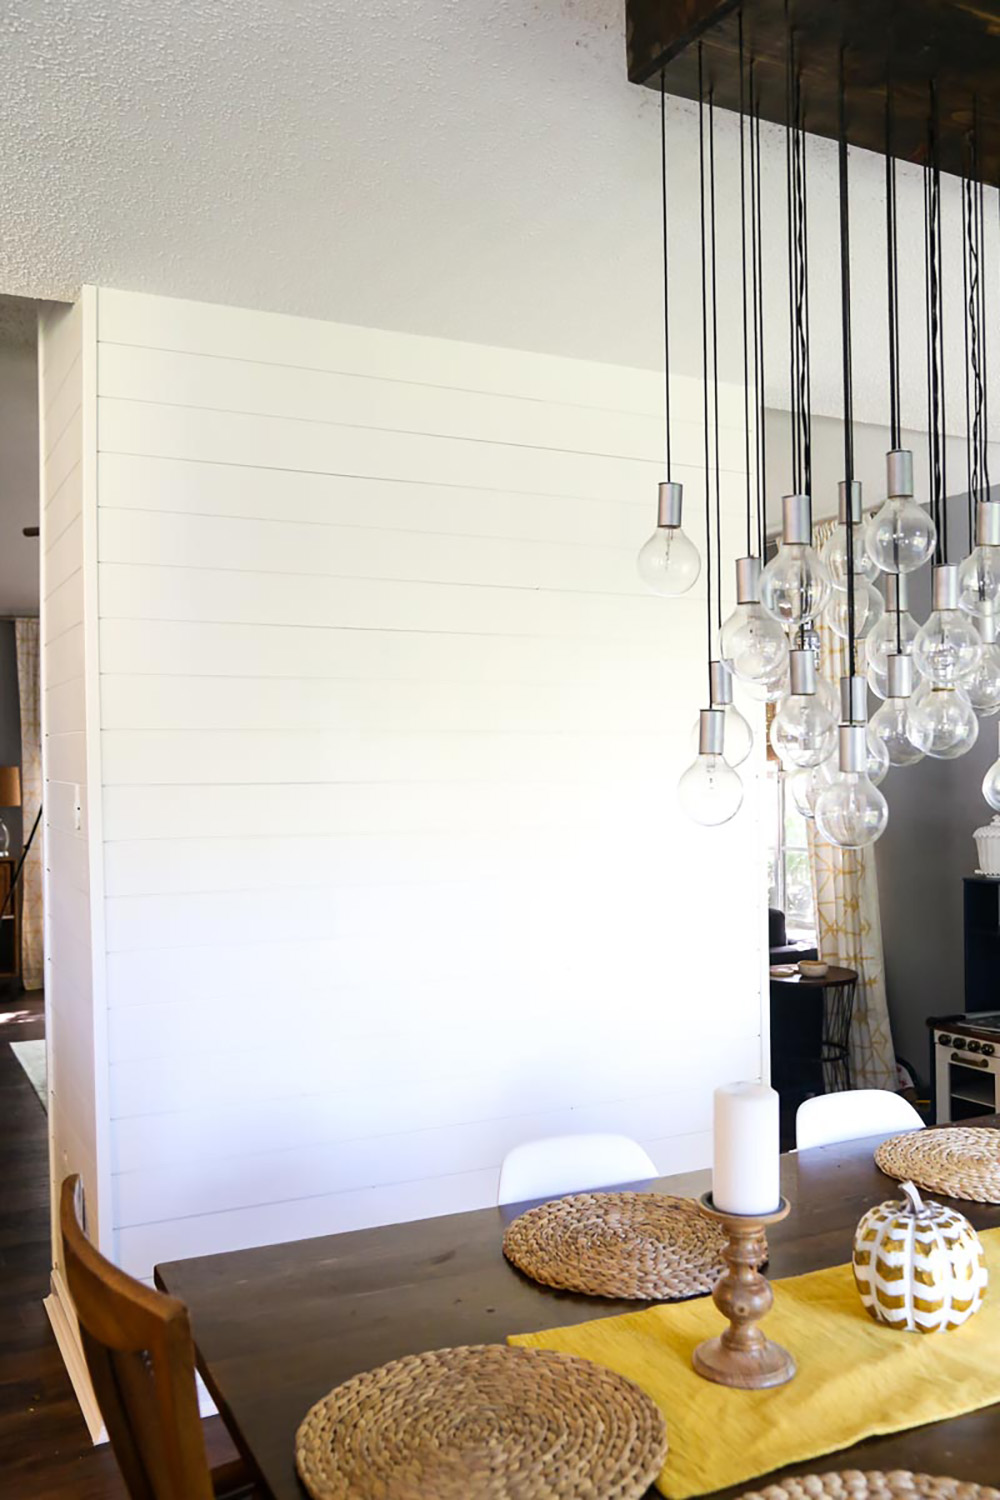 A white shiplap wall in a dining room with a wooden dining room table, placemats, candles and a handing light fixture.